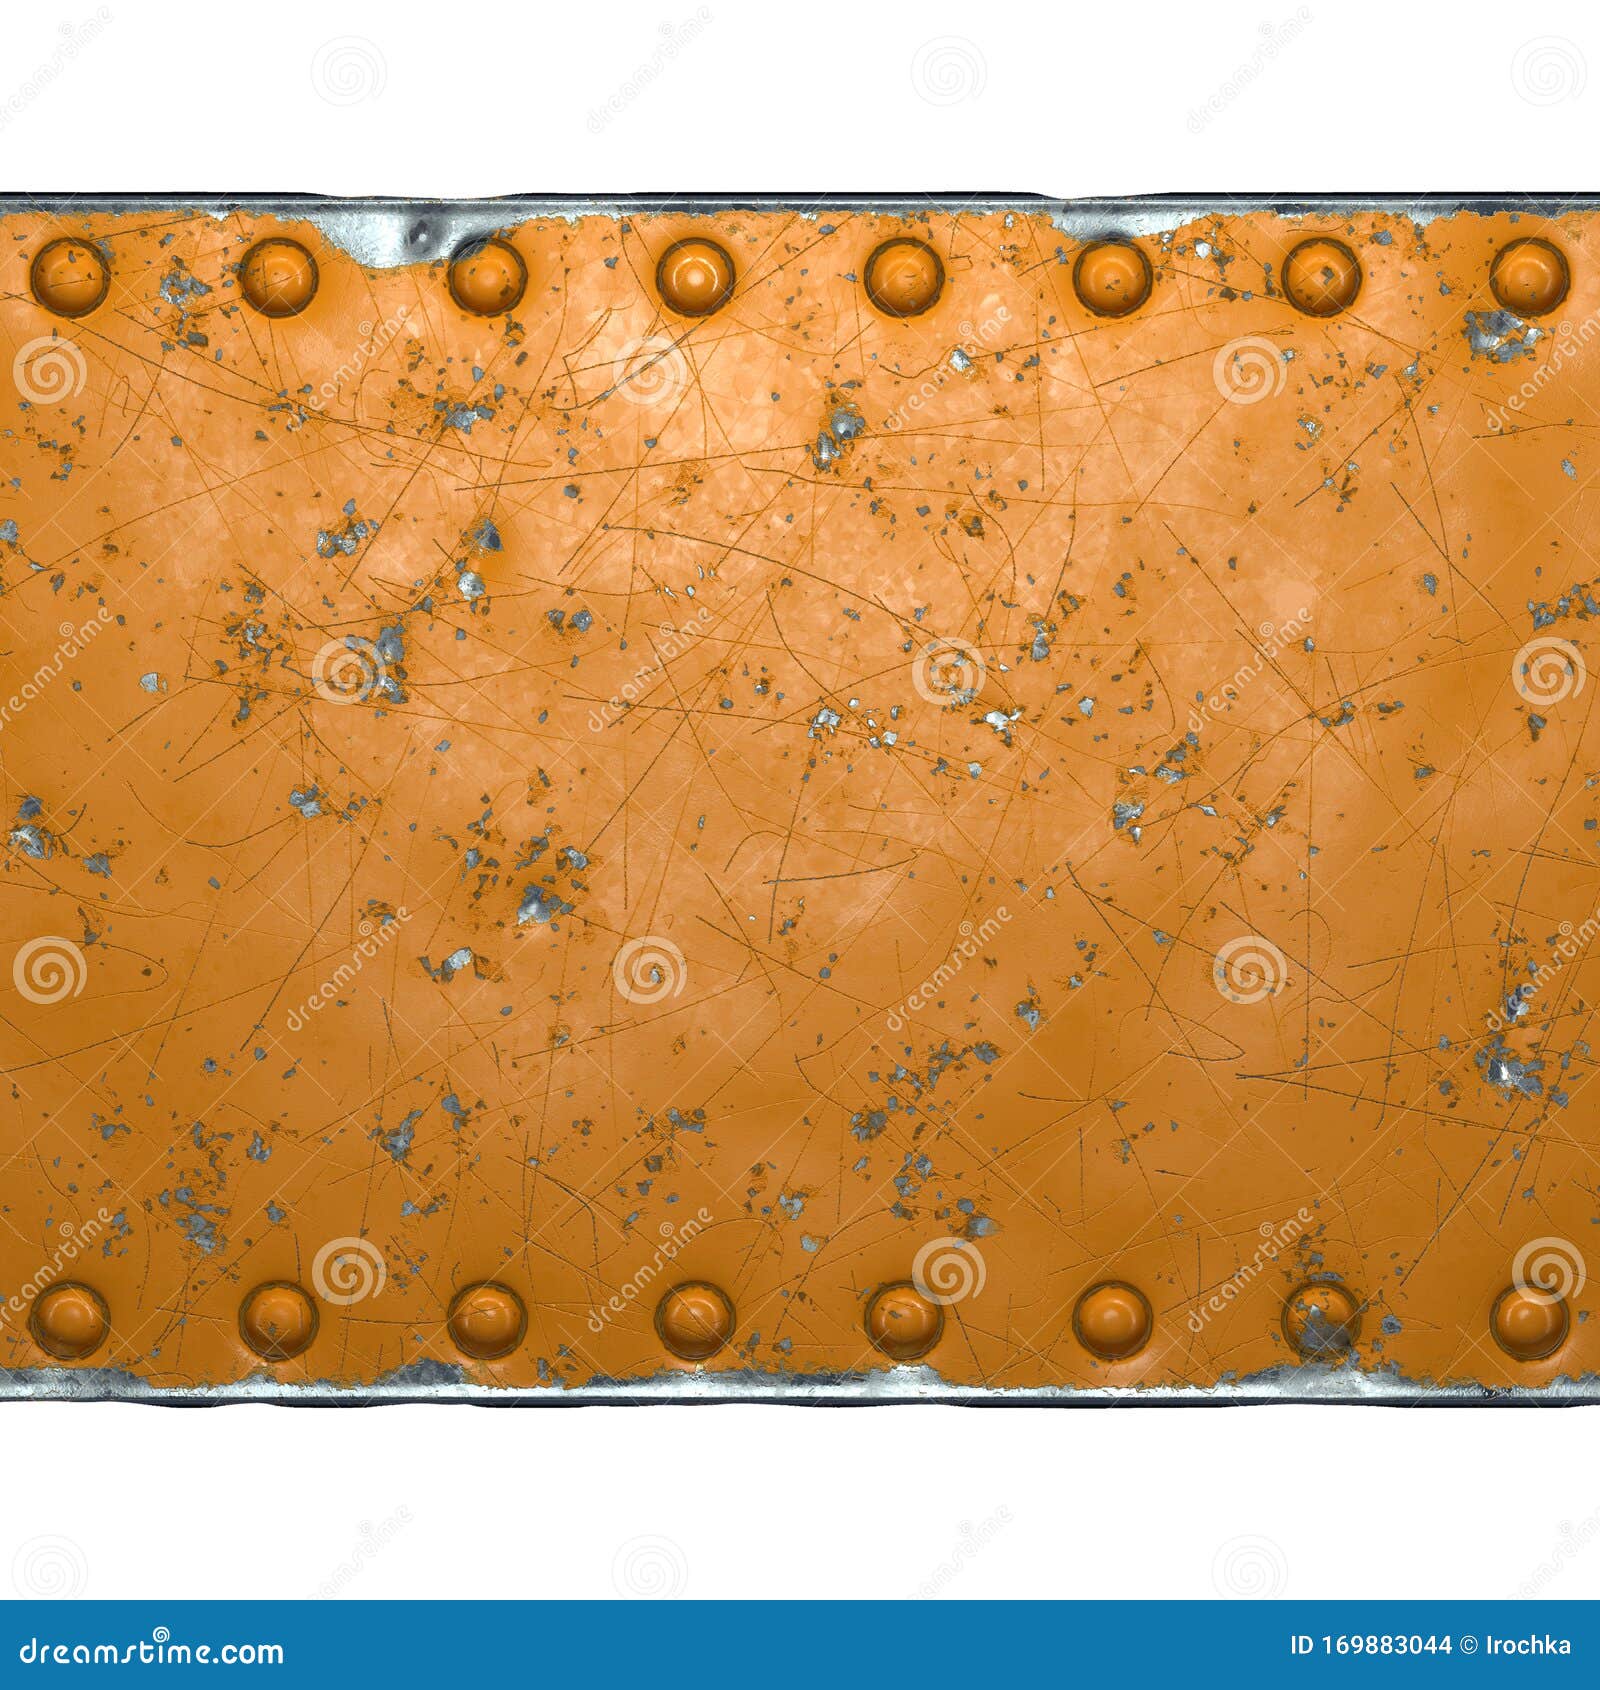 rusty metal strip with rivets on the center against on white background 3d